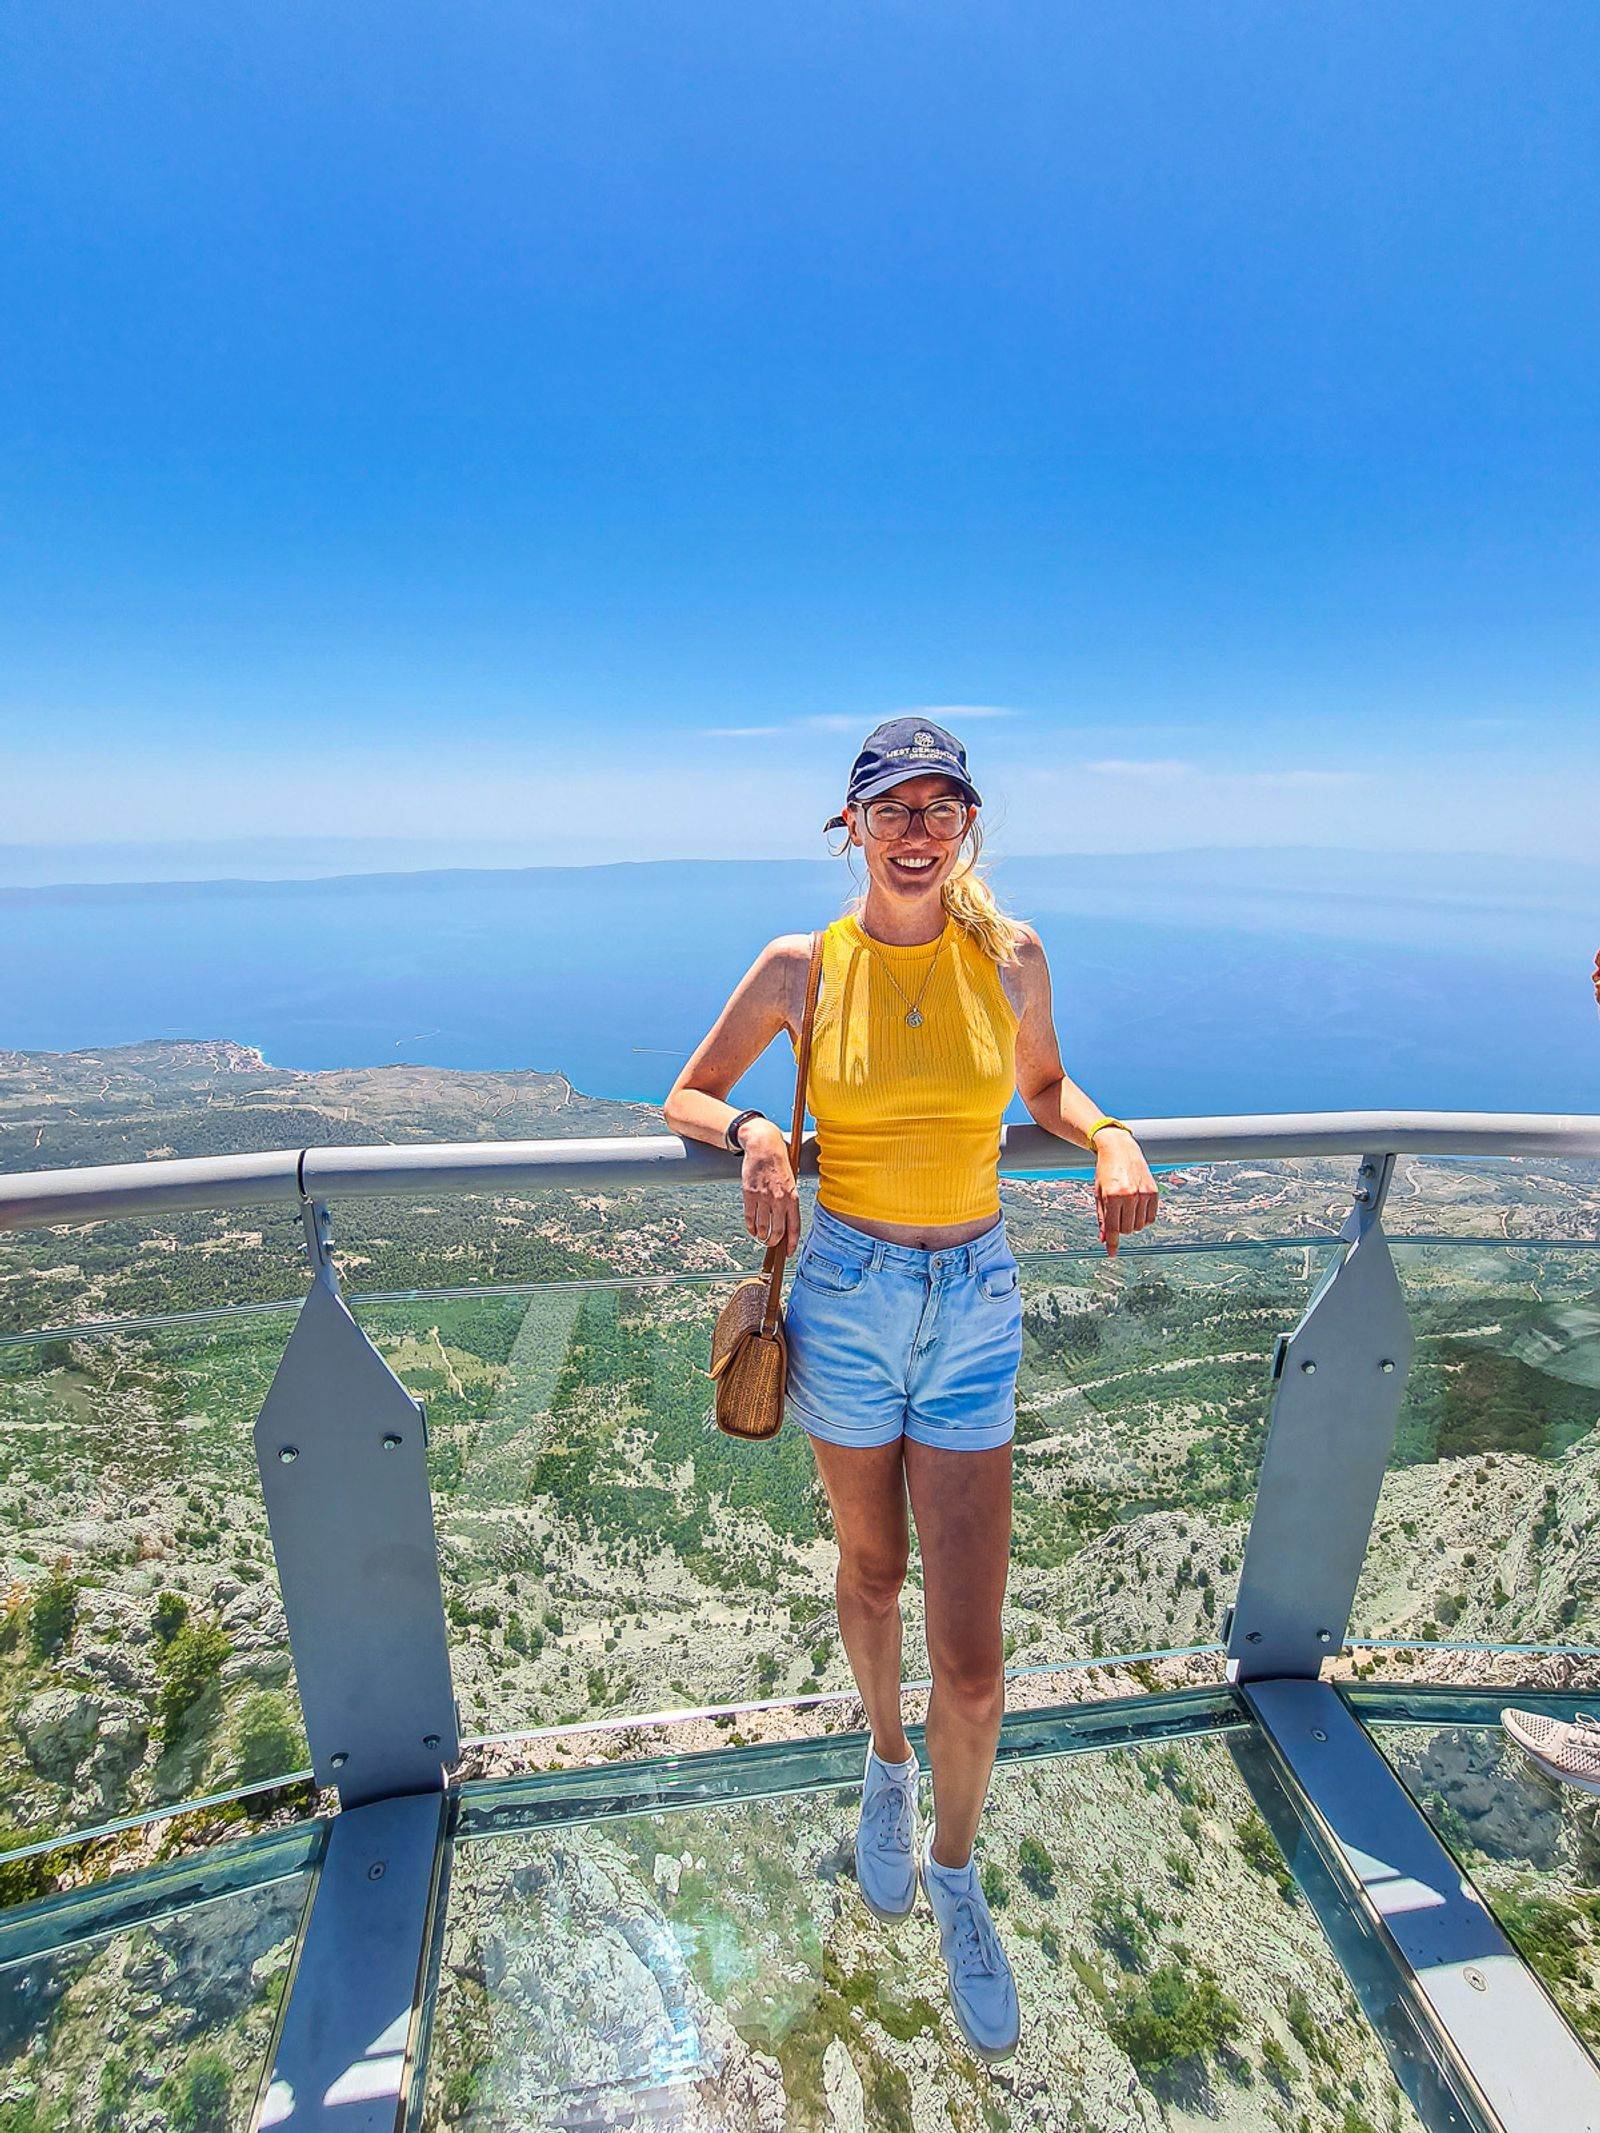 Woman in shorts and a yellow tshirt standing on a glass walkway above cliffs below